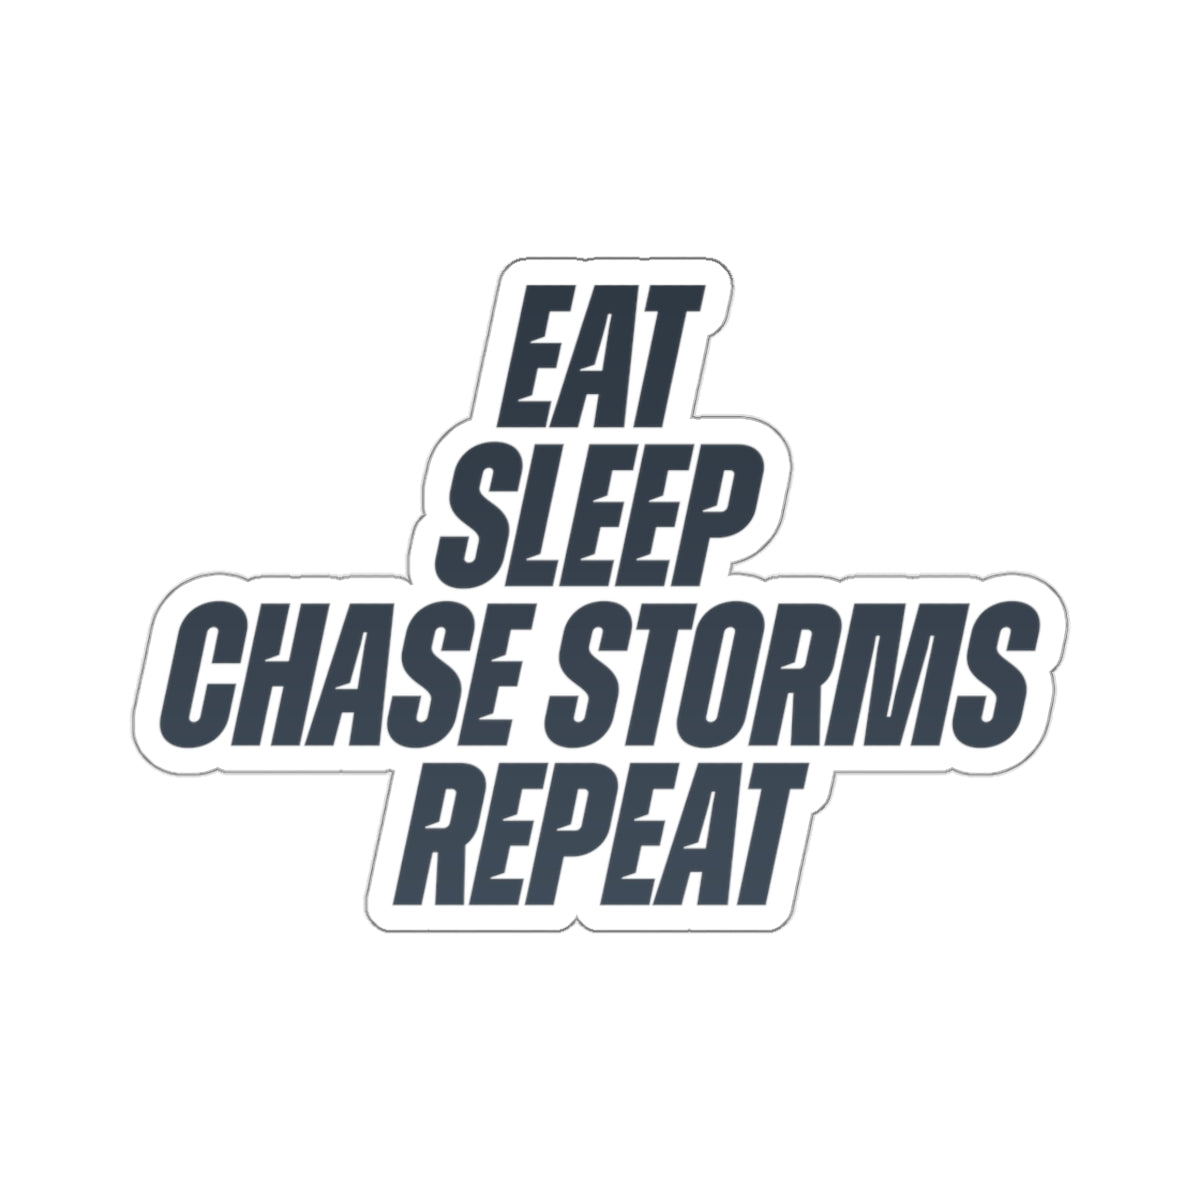 Eat, Sleep, Chase Storms, Repeat Sticker 